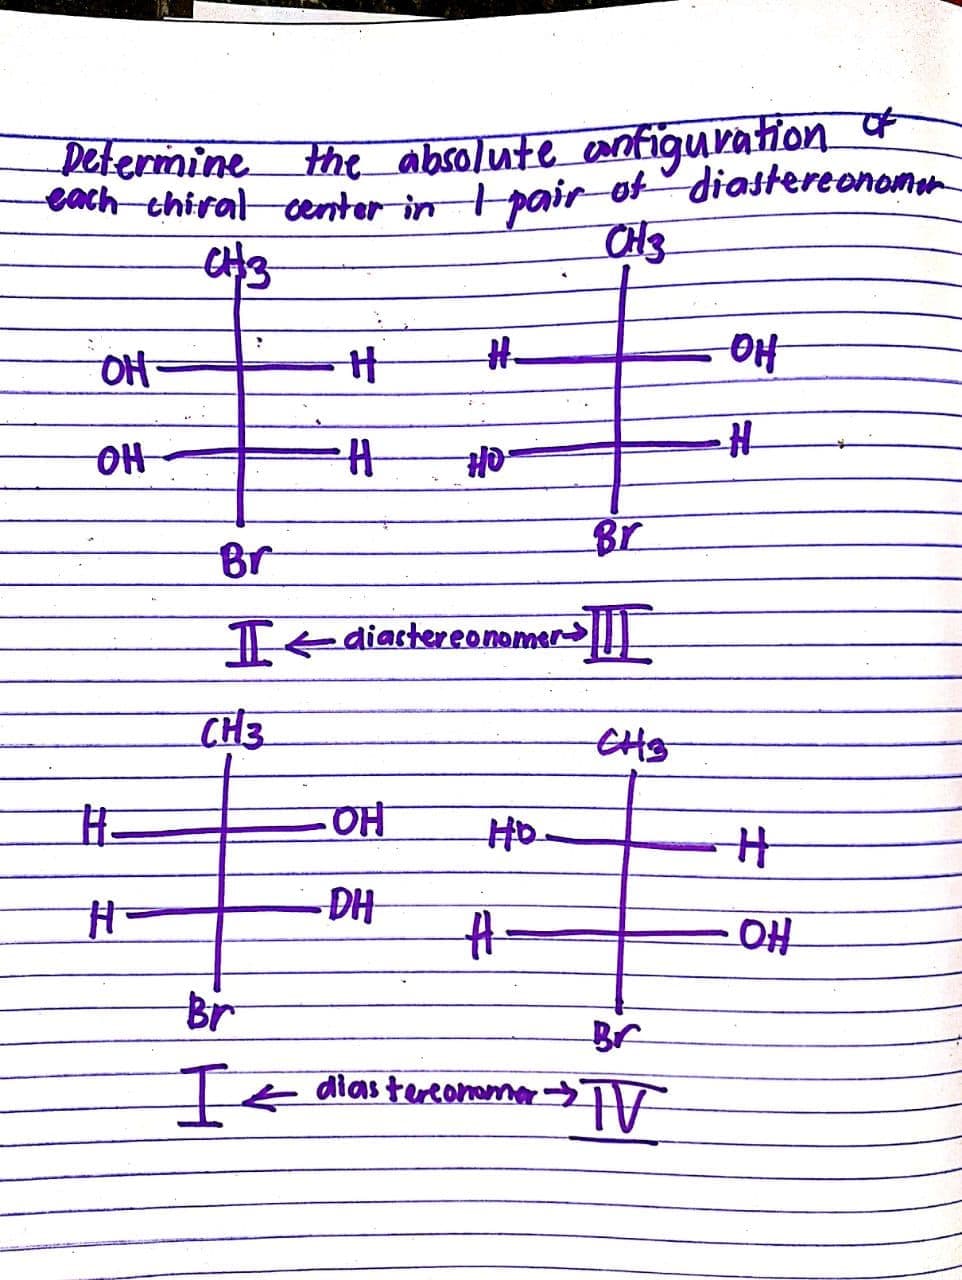 Determine the absolute cantiguuration
each thiralcenter in pair of diastereonomon
CH3
Br
Br
Teaiastereonomer
CH3
世
DH
Br
Br
Ie diastereonamer >T
